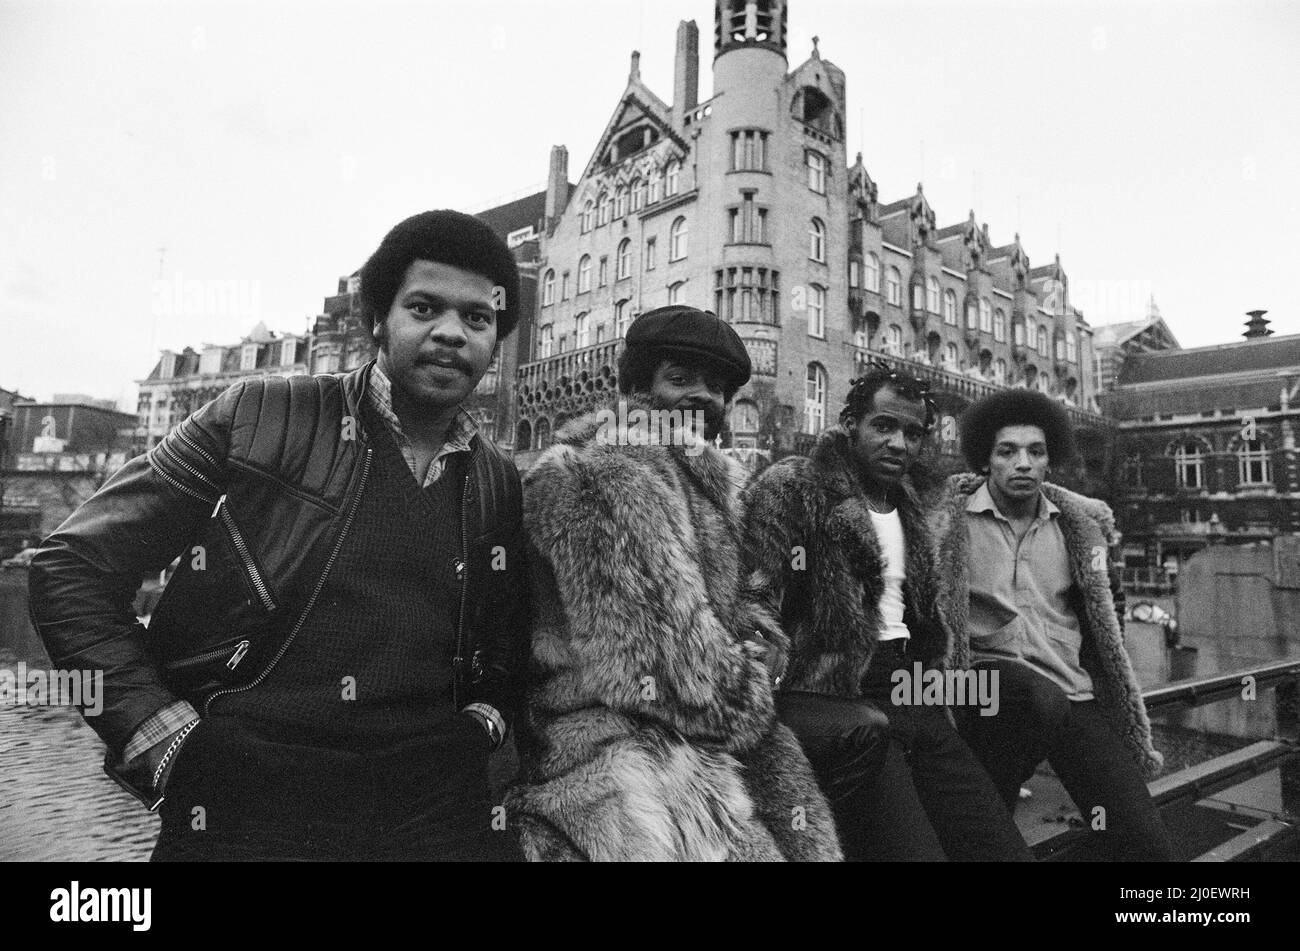 The Real Thing, British soul group from Liverpool, England, pictured in Amsterdam, Holland, 9th March 1979. Chris Amoo, Dave Smith, Kenny Davis and Ray Lake. Stock Photo